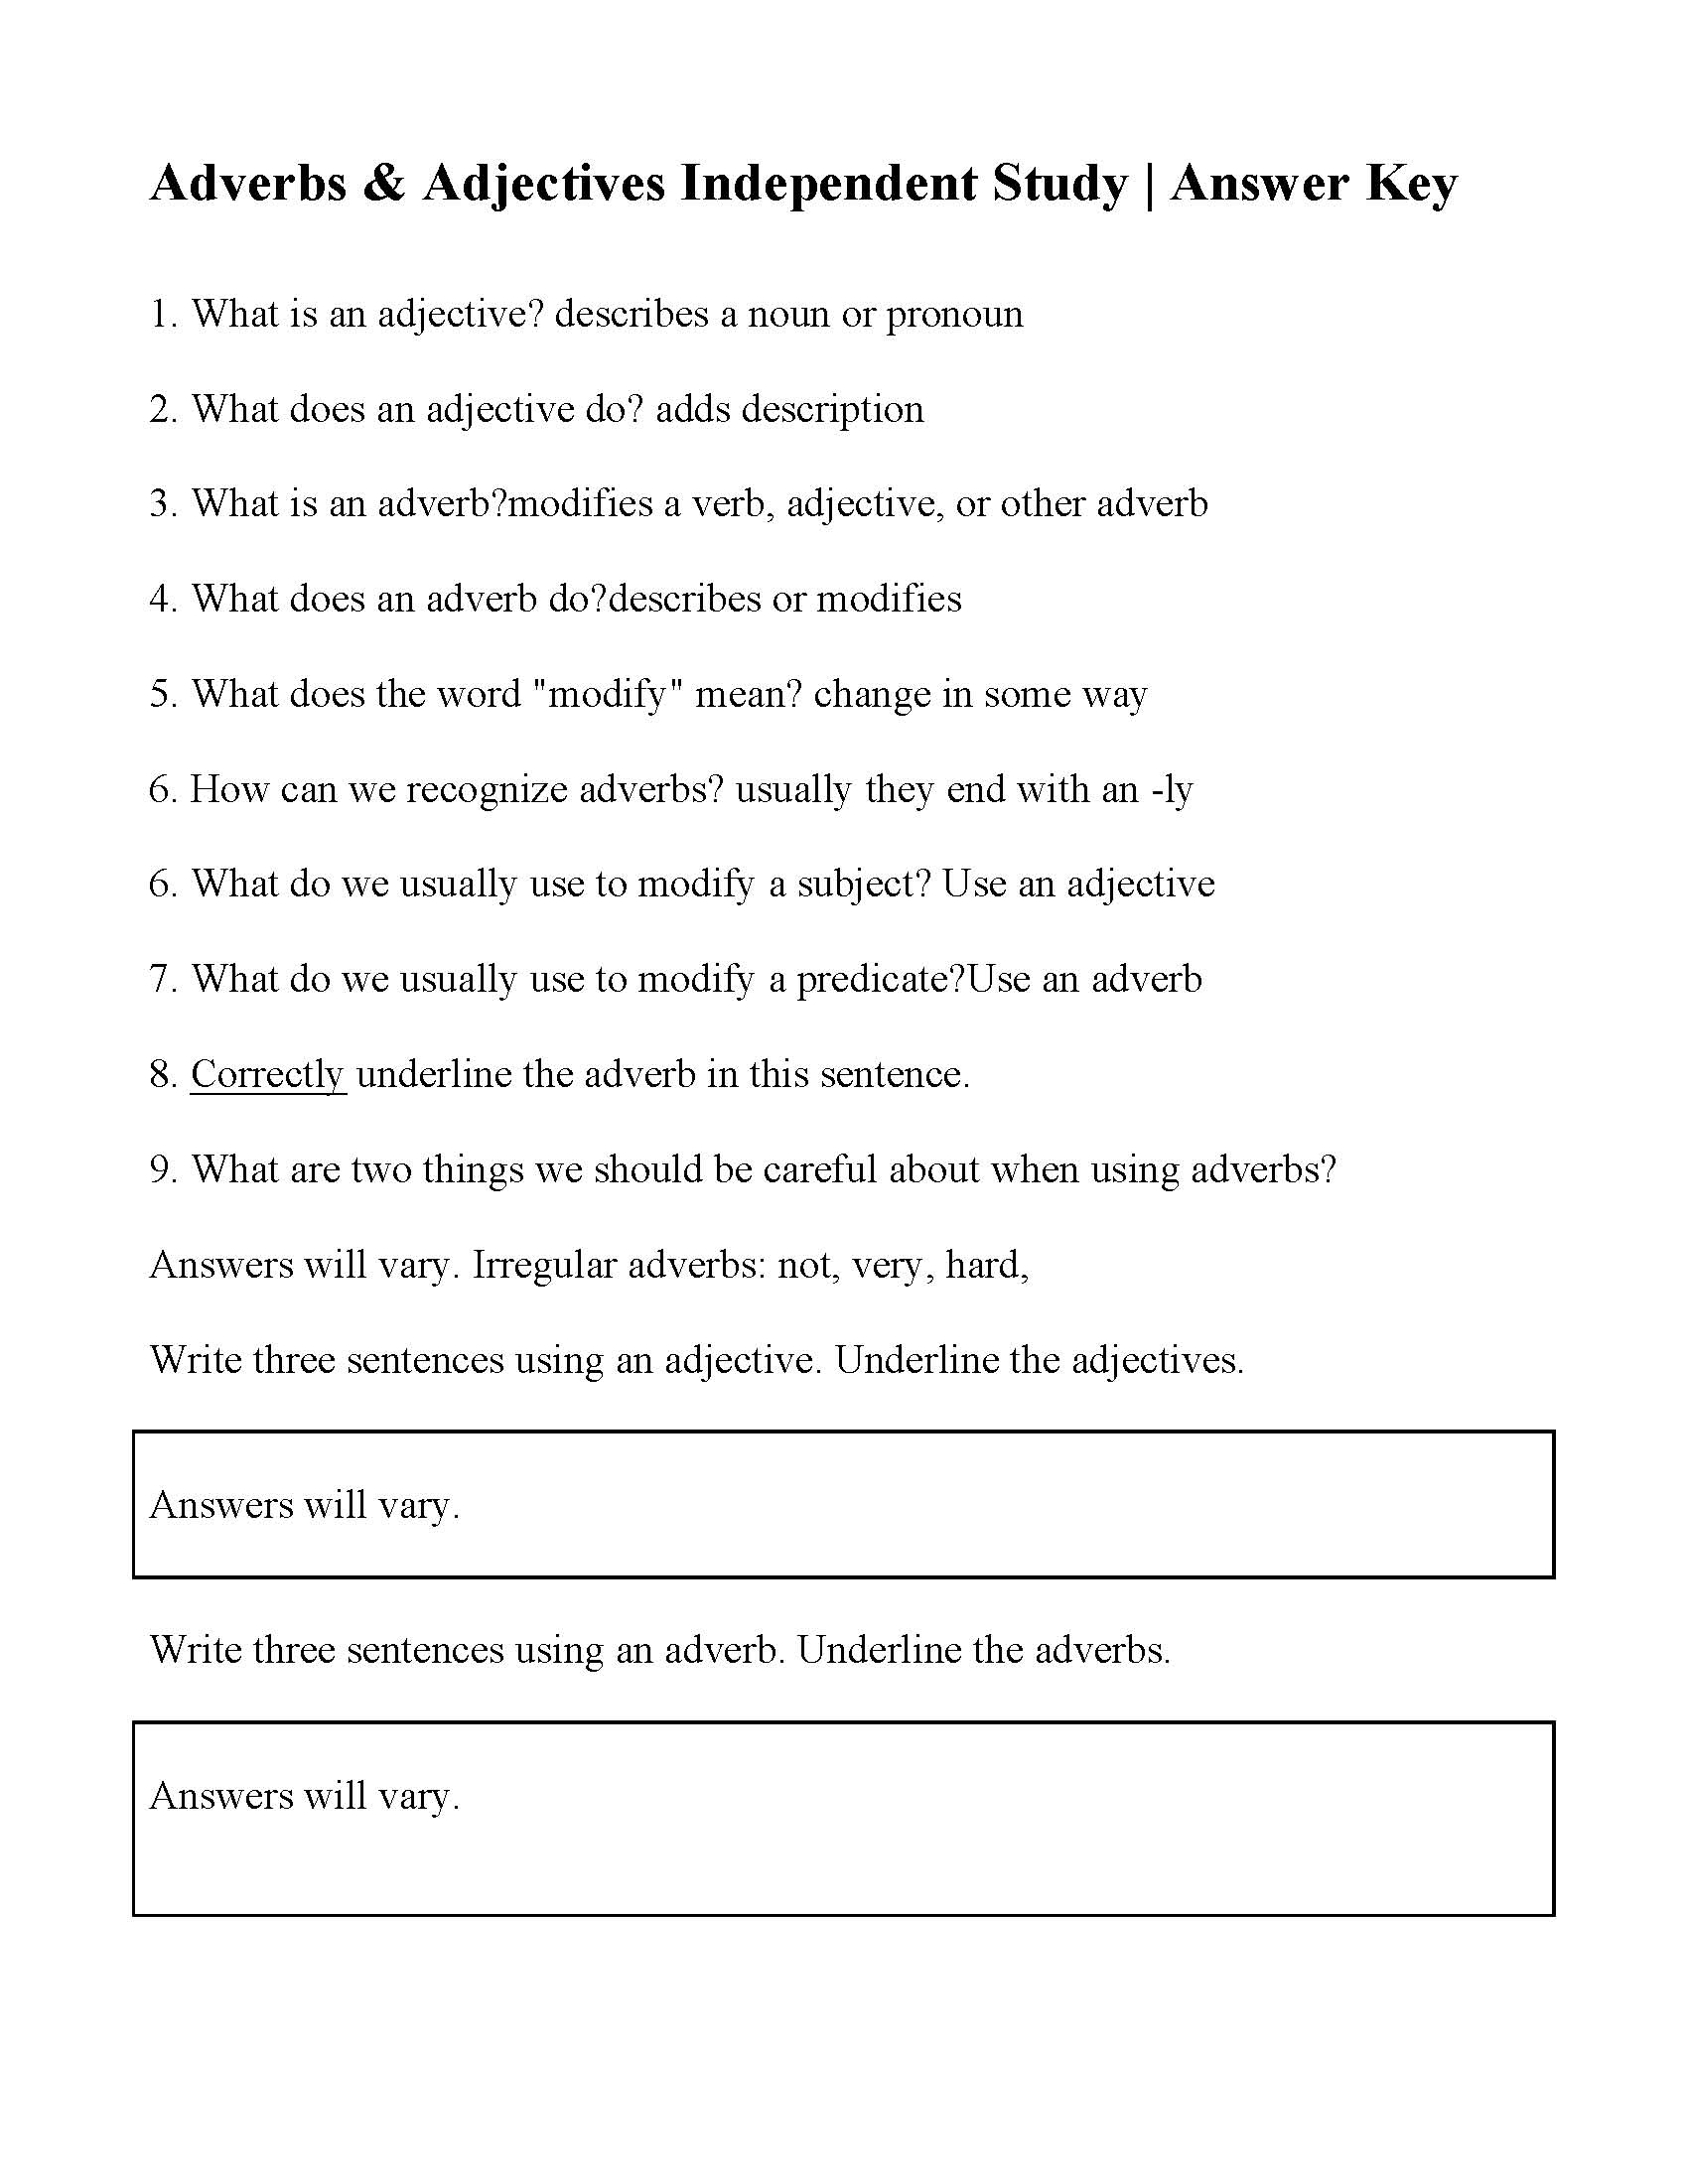 adjectives-worksheet-answer-key-middle-school-high-school-adjectives-and-nouns-worksheets-for